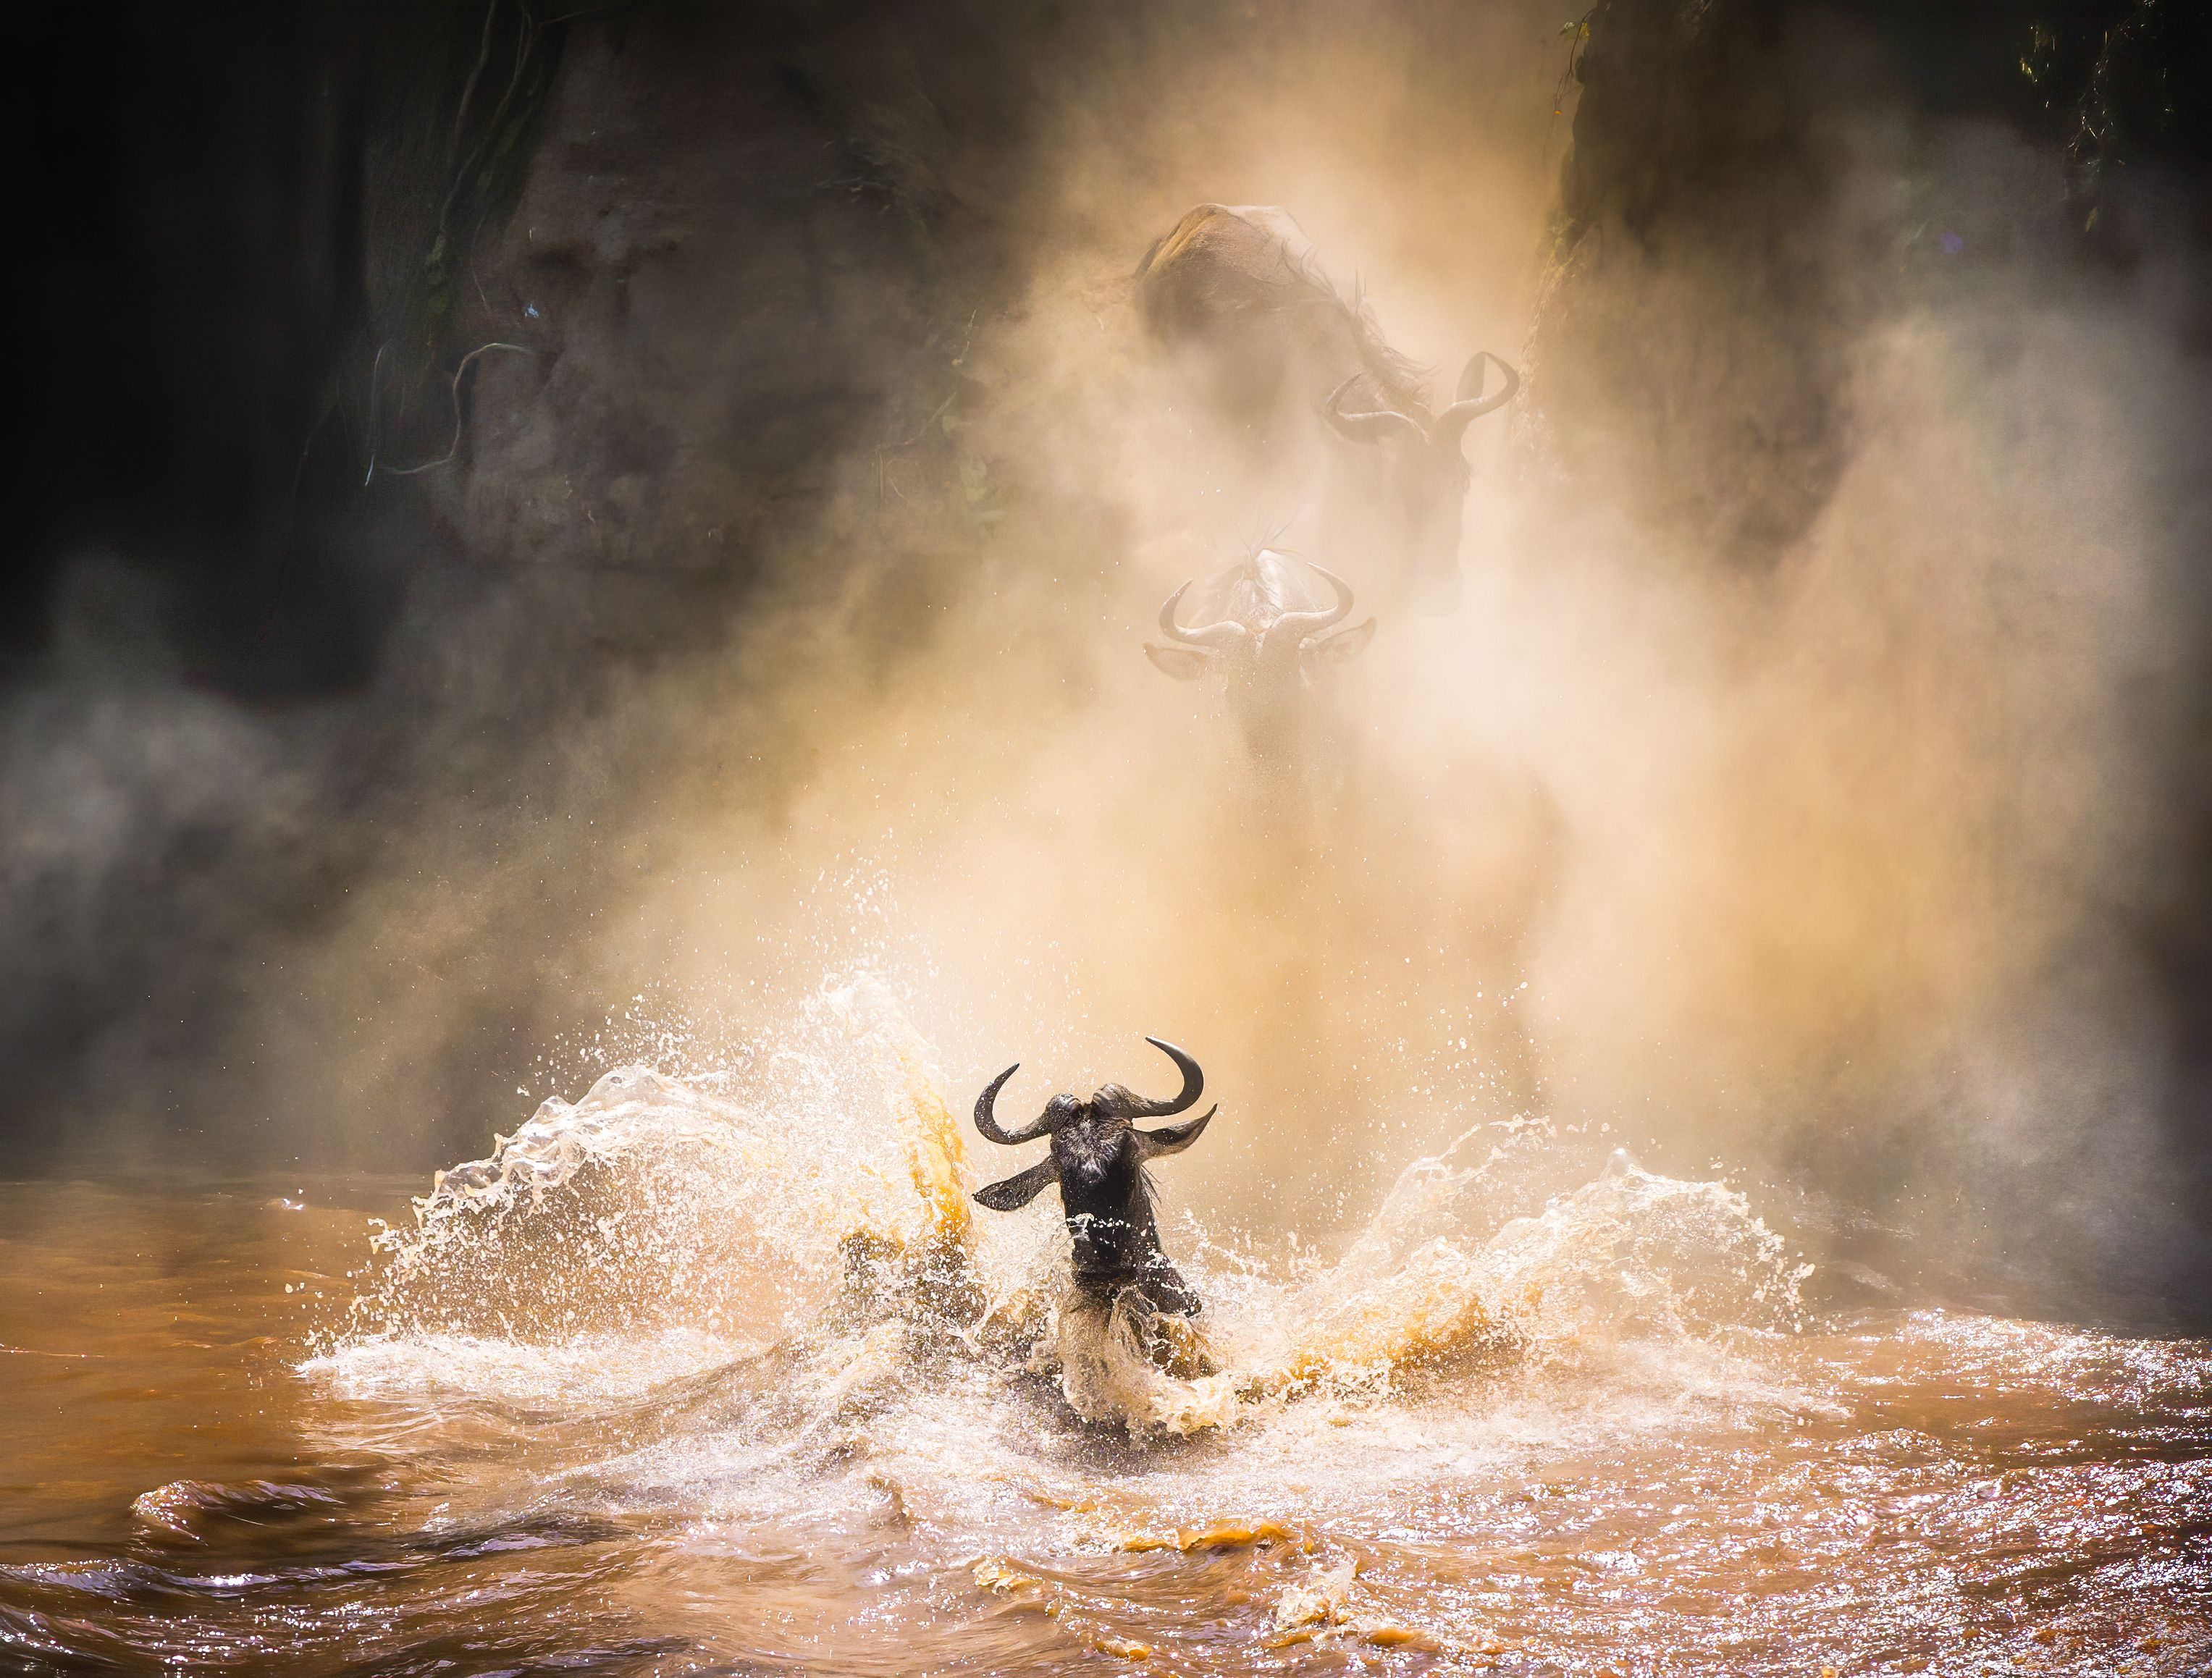 African Safari Kenya, watch the wildebeest cross the Mara River during the great migration